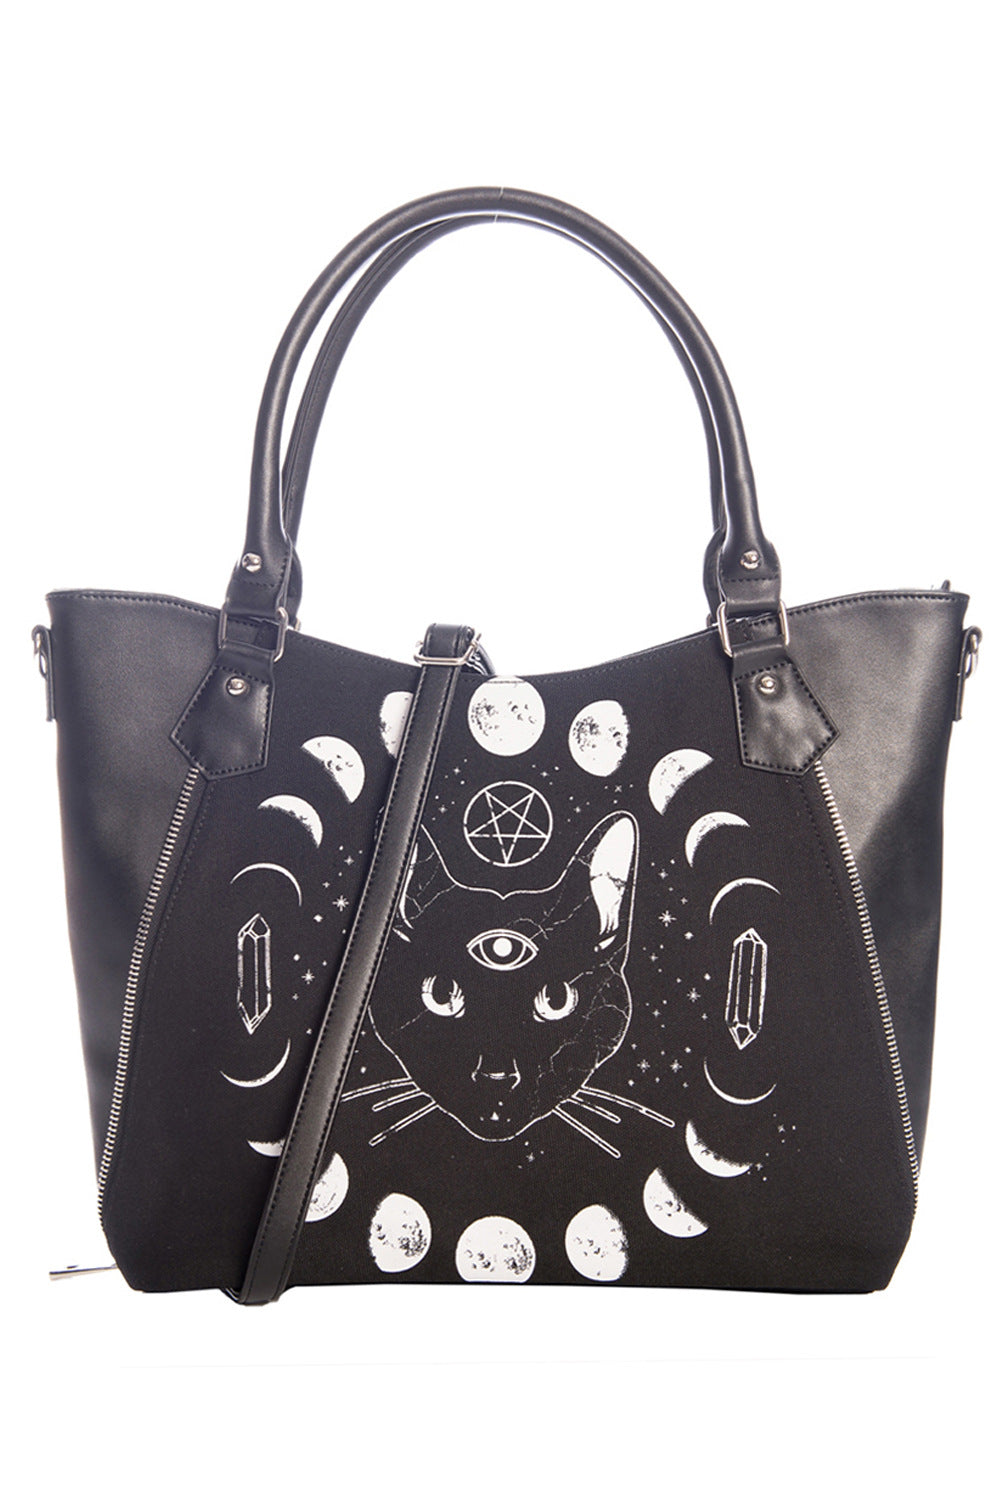 Banned Alternative PENTACLE COVEN TOTE BAG